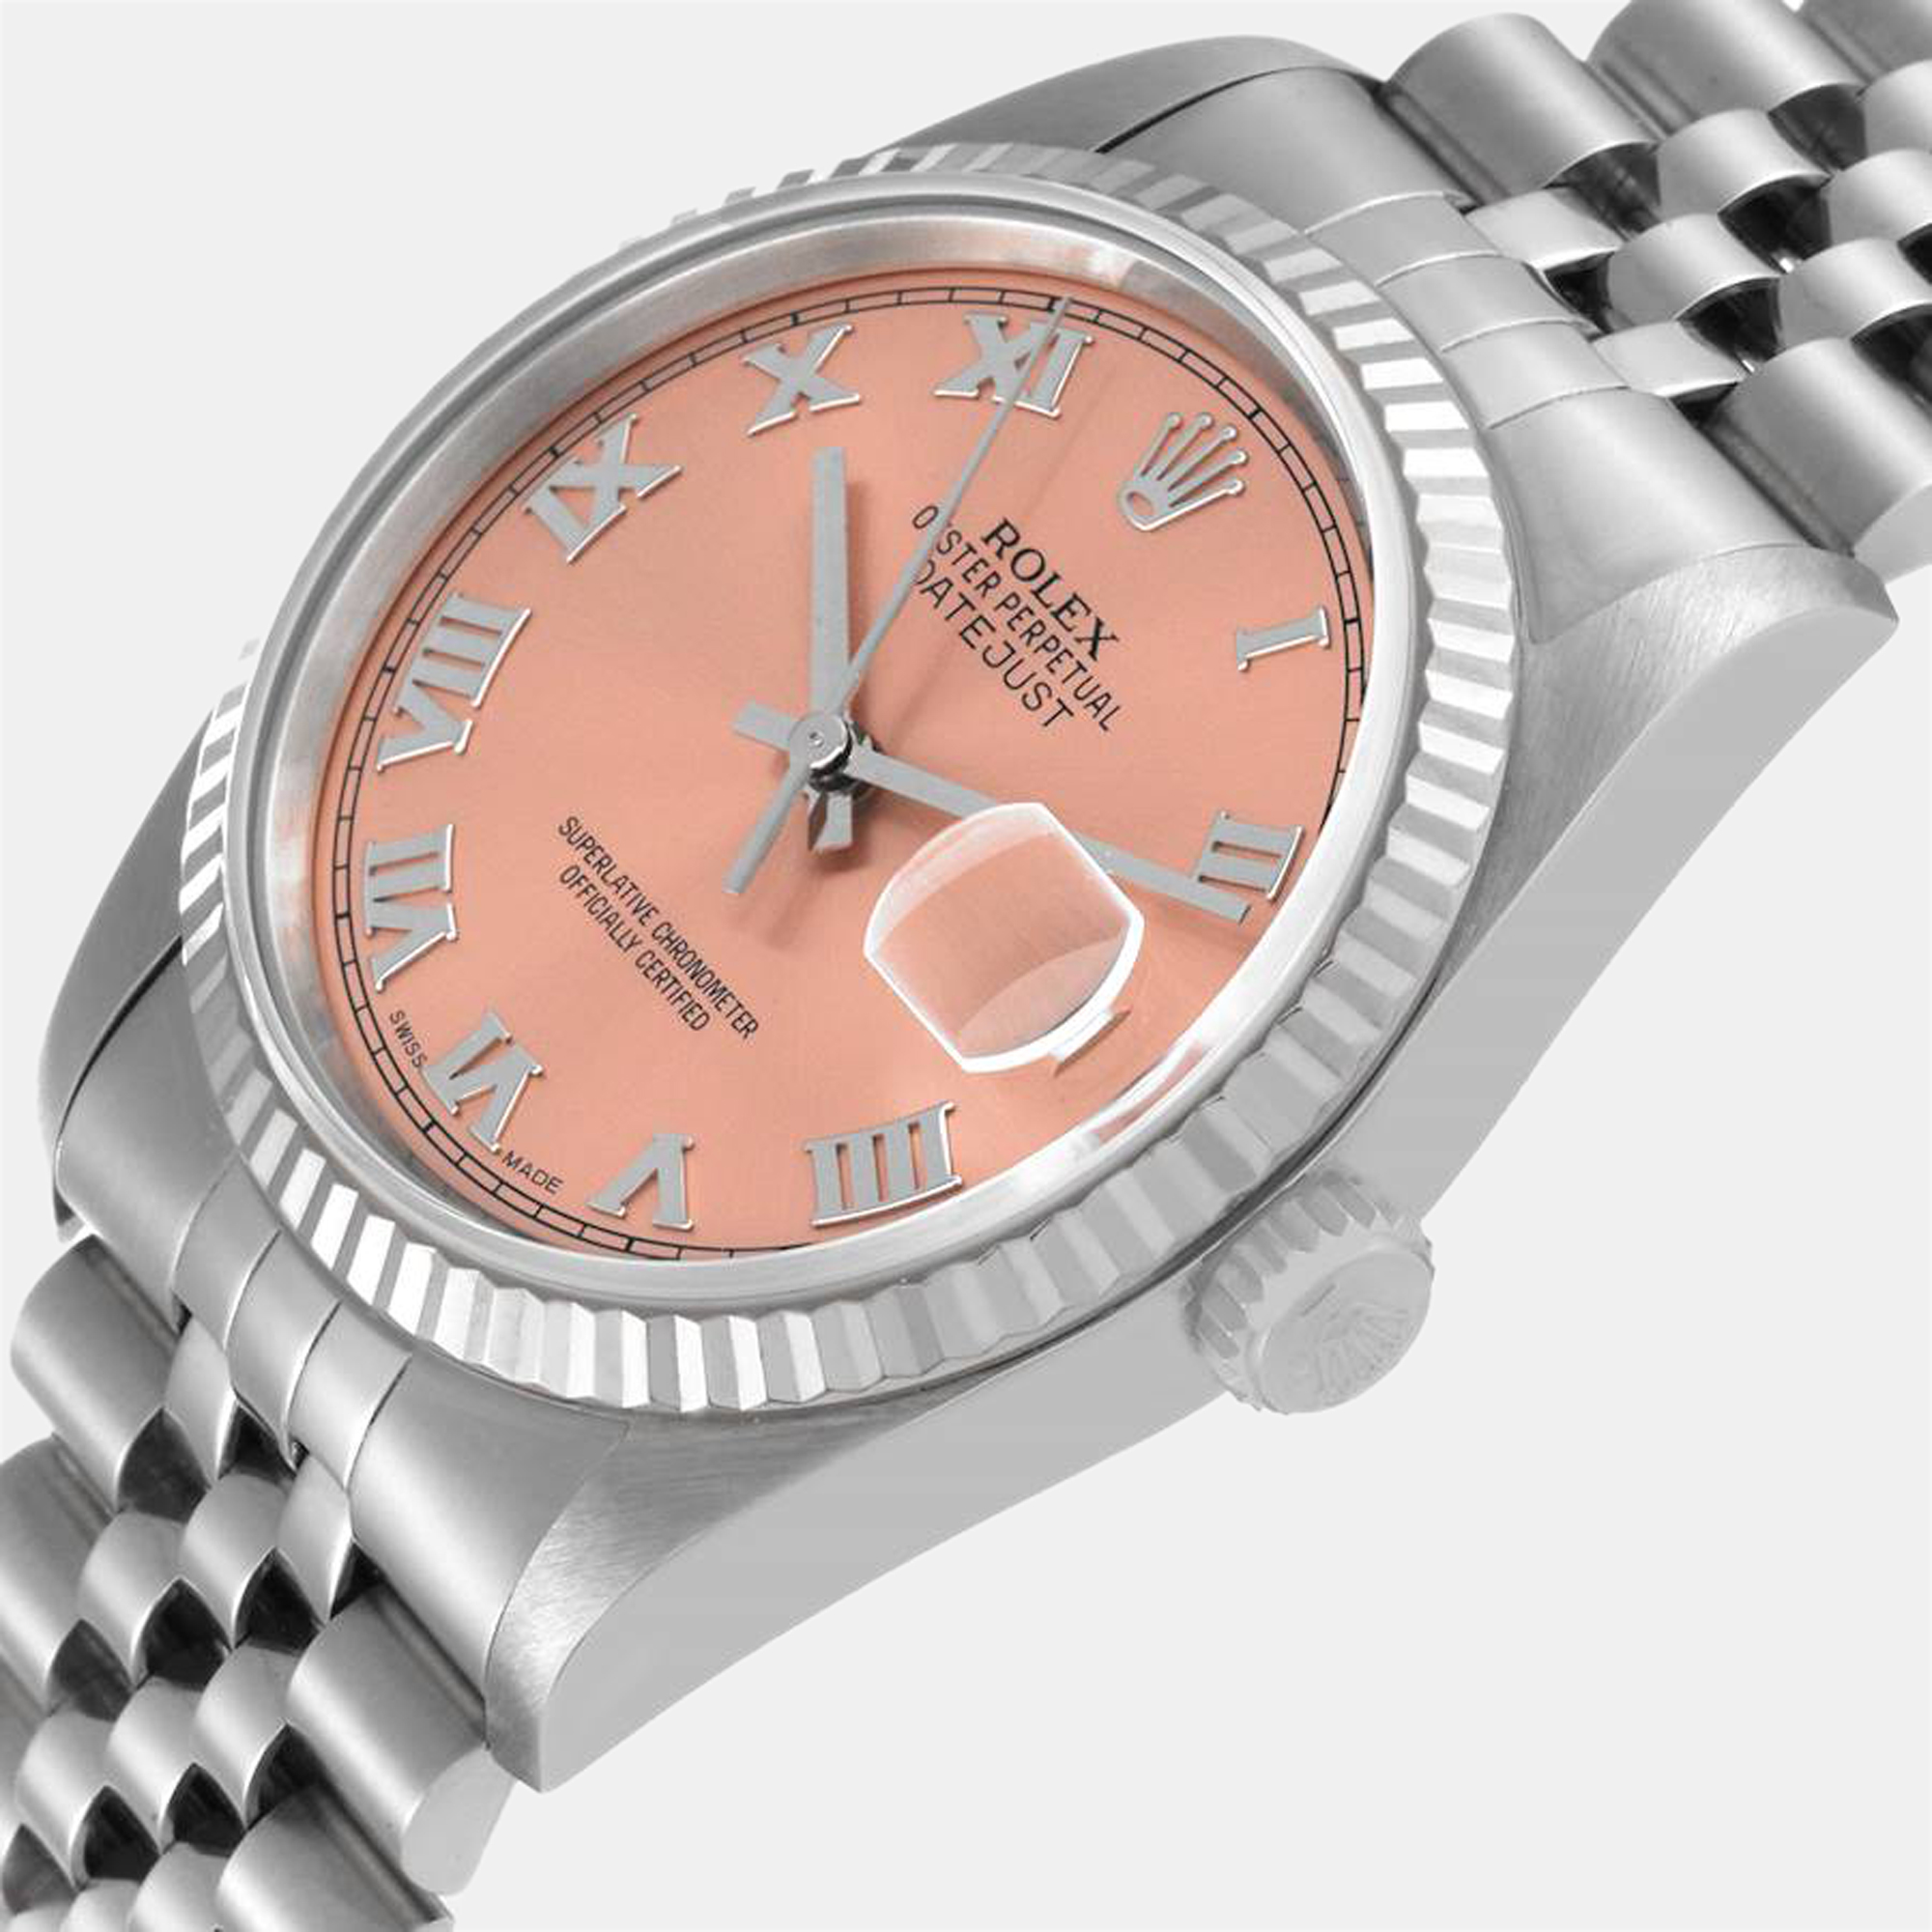 

Rolex Salmon 18K White Gold And Stainless Steel Datejust 16234 Men's Wristwatch 36 mm, Pink